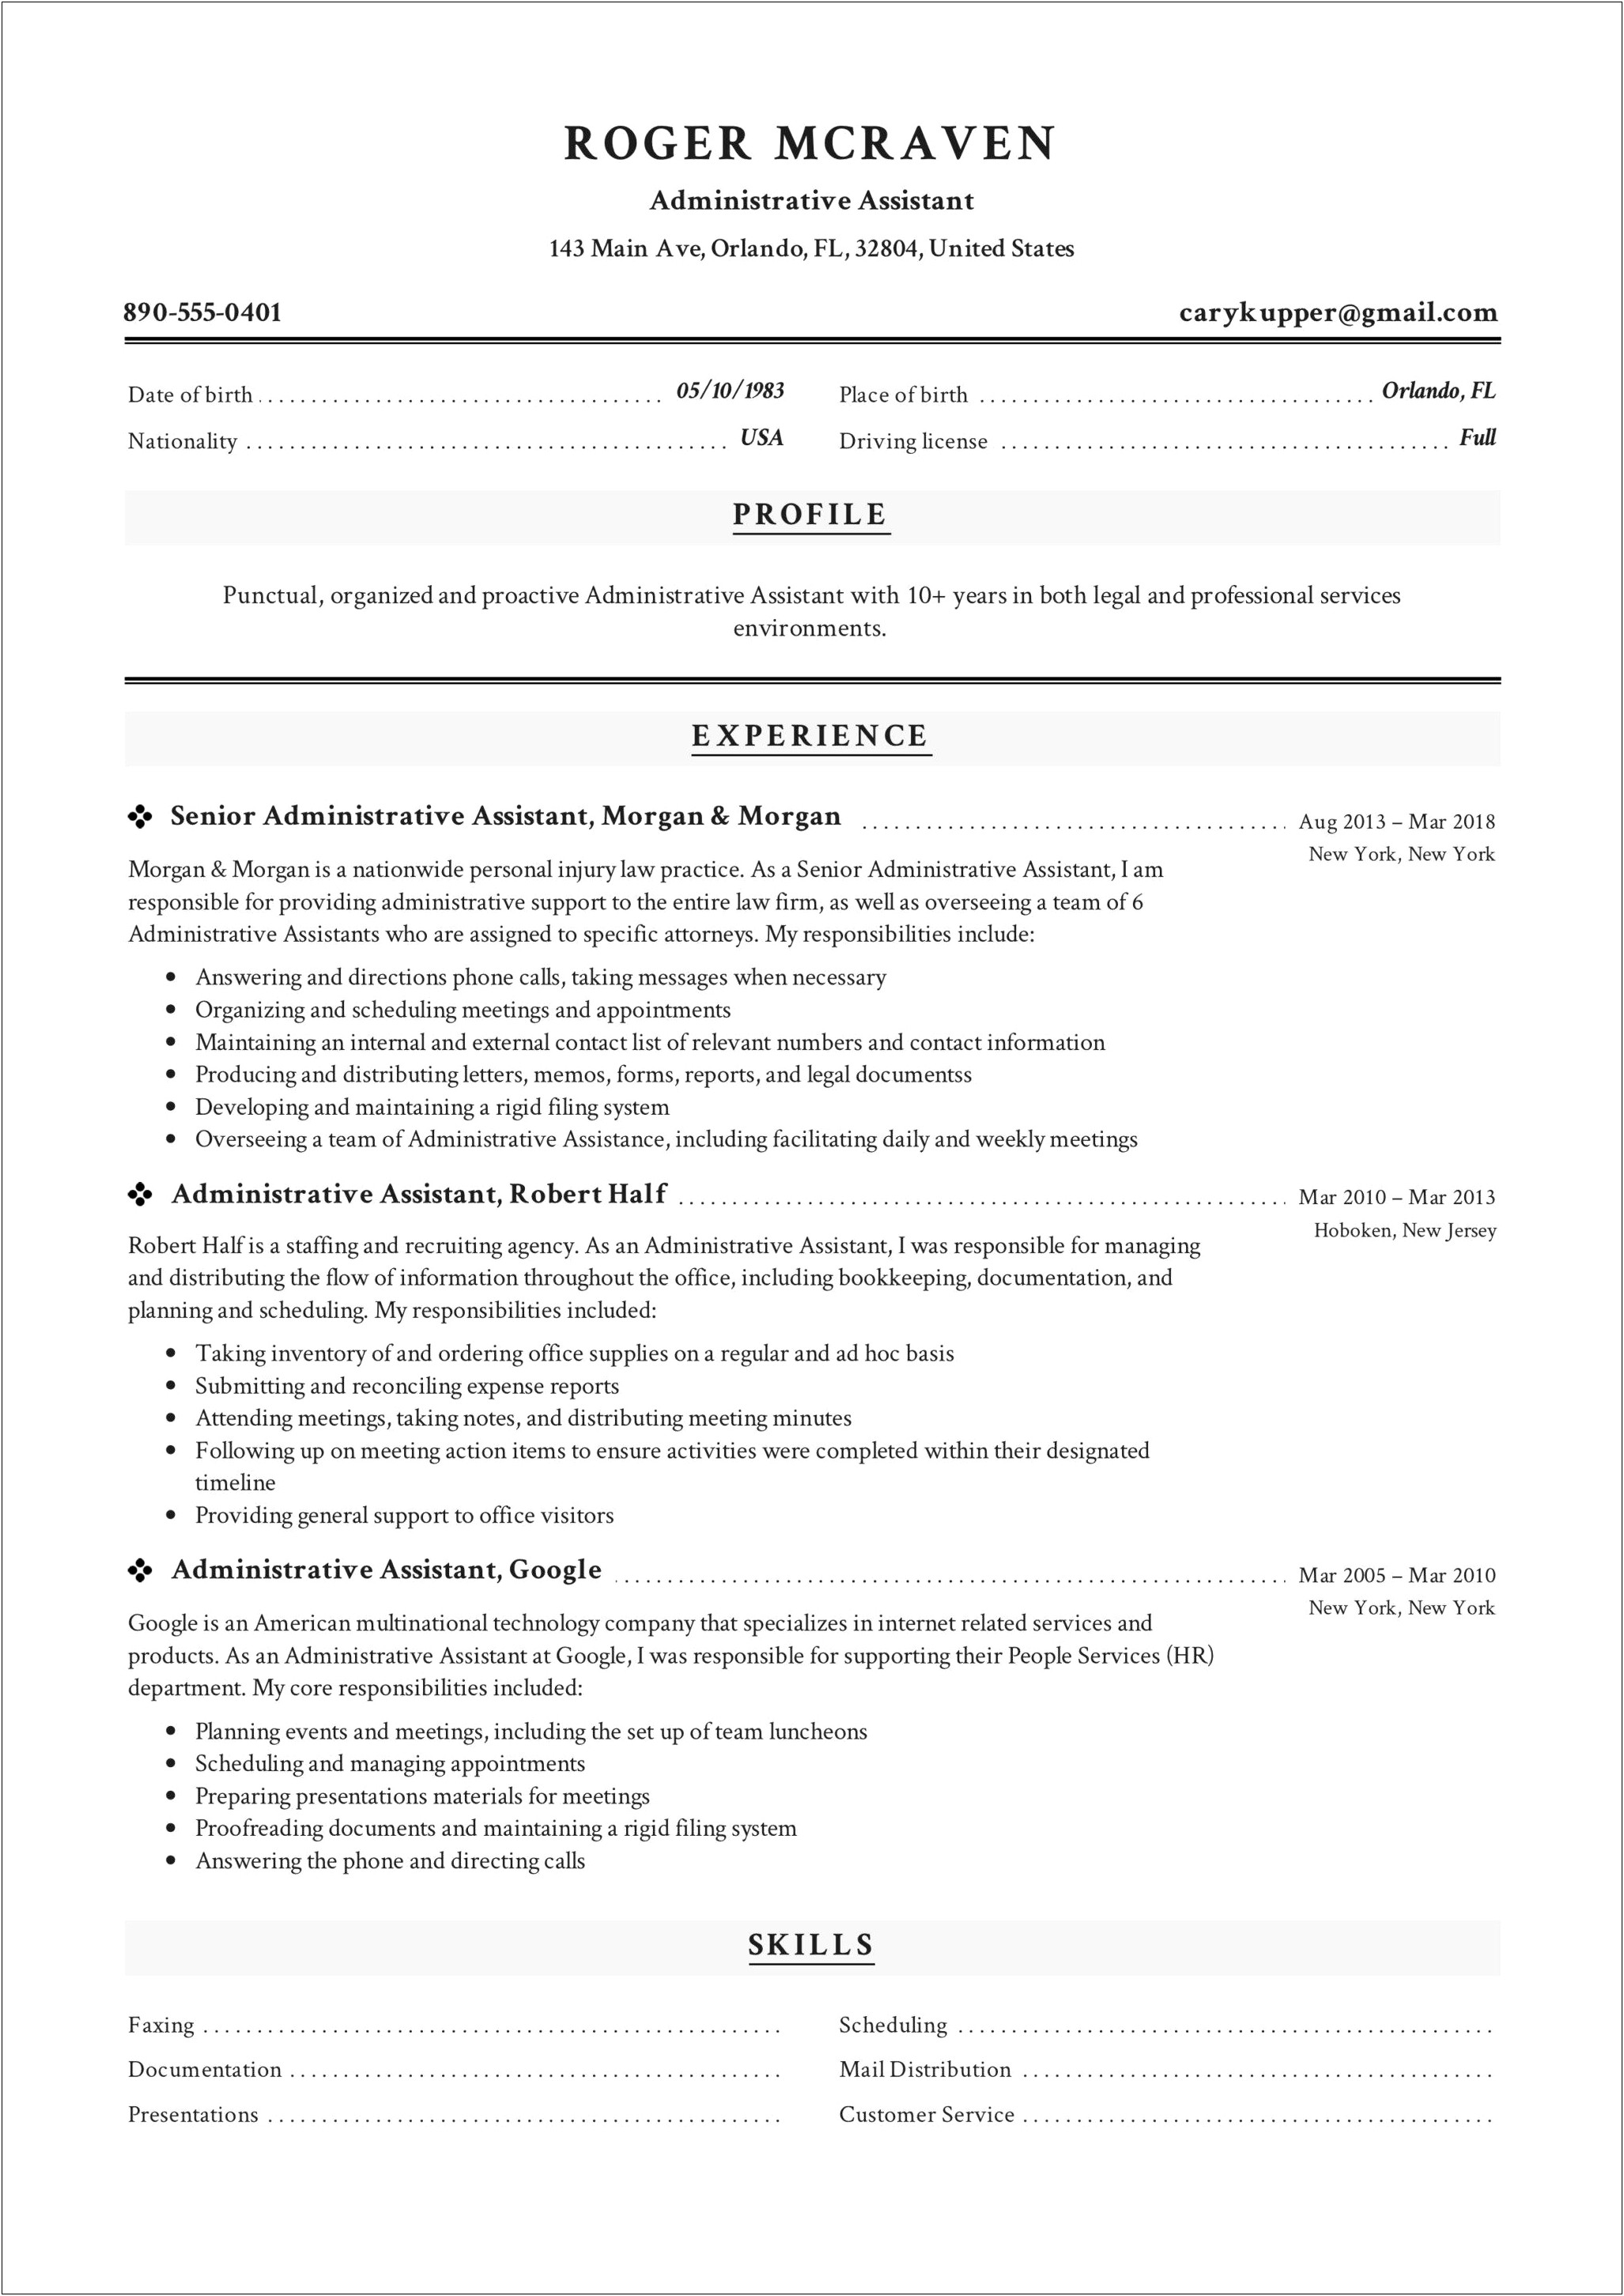 Office Assistant Skills List For Resume